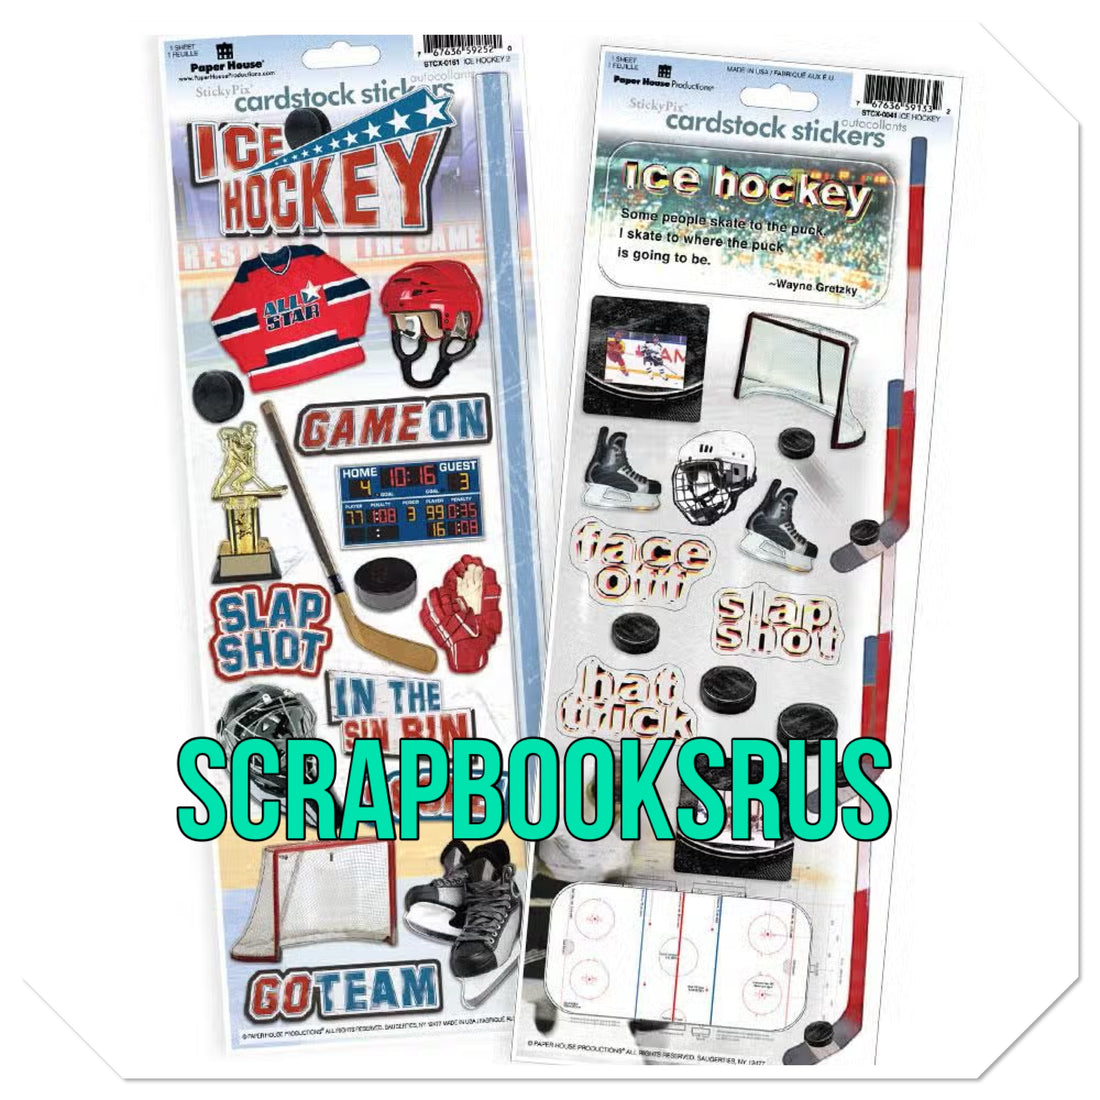 Paper House ICE HOCKEY Cardstock Sticker Value Pack